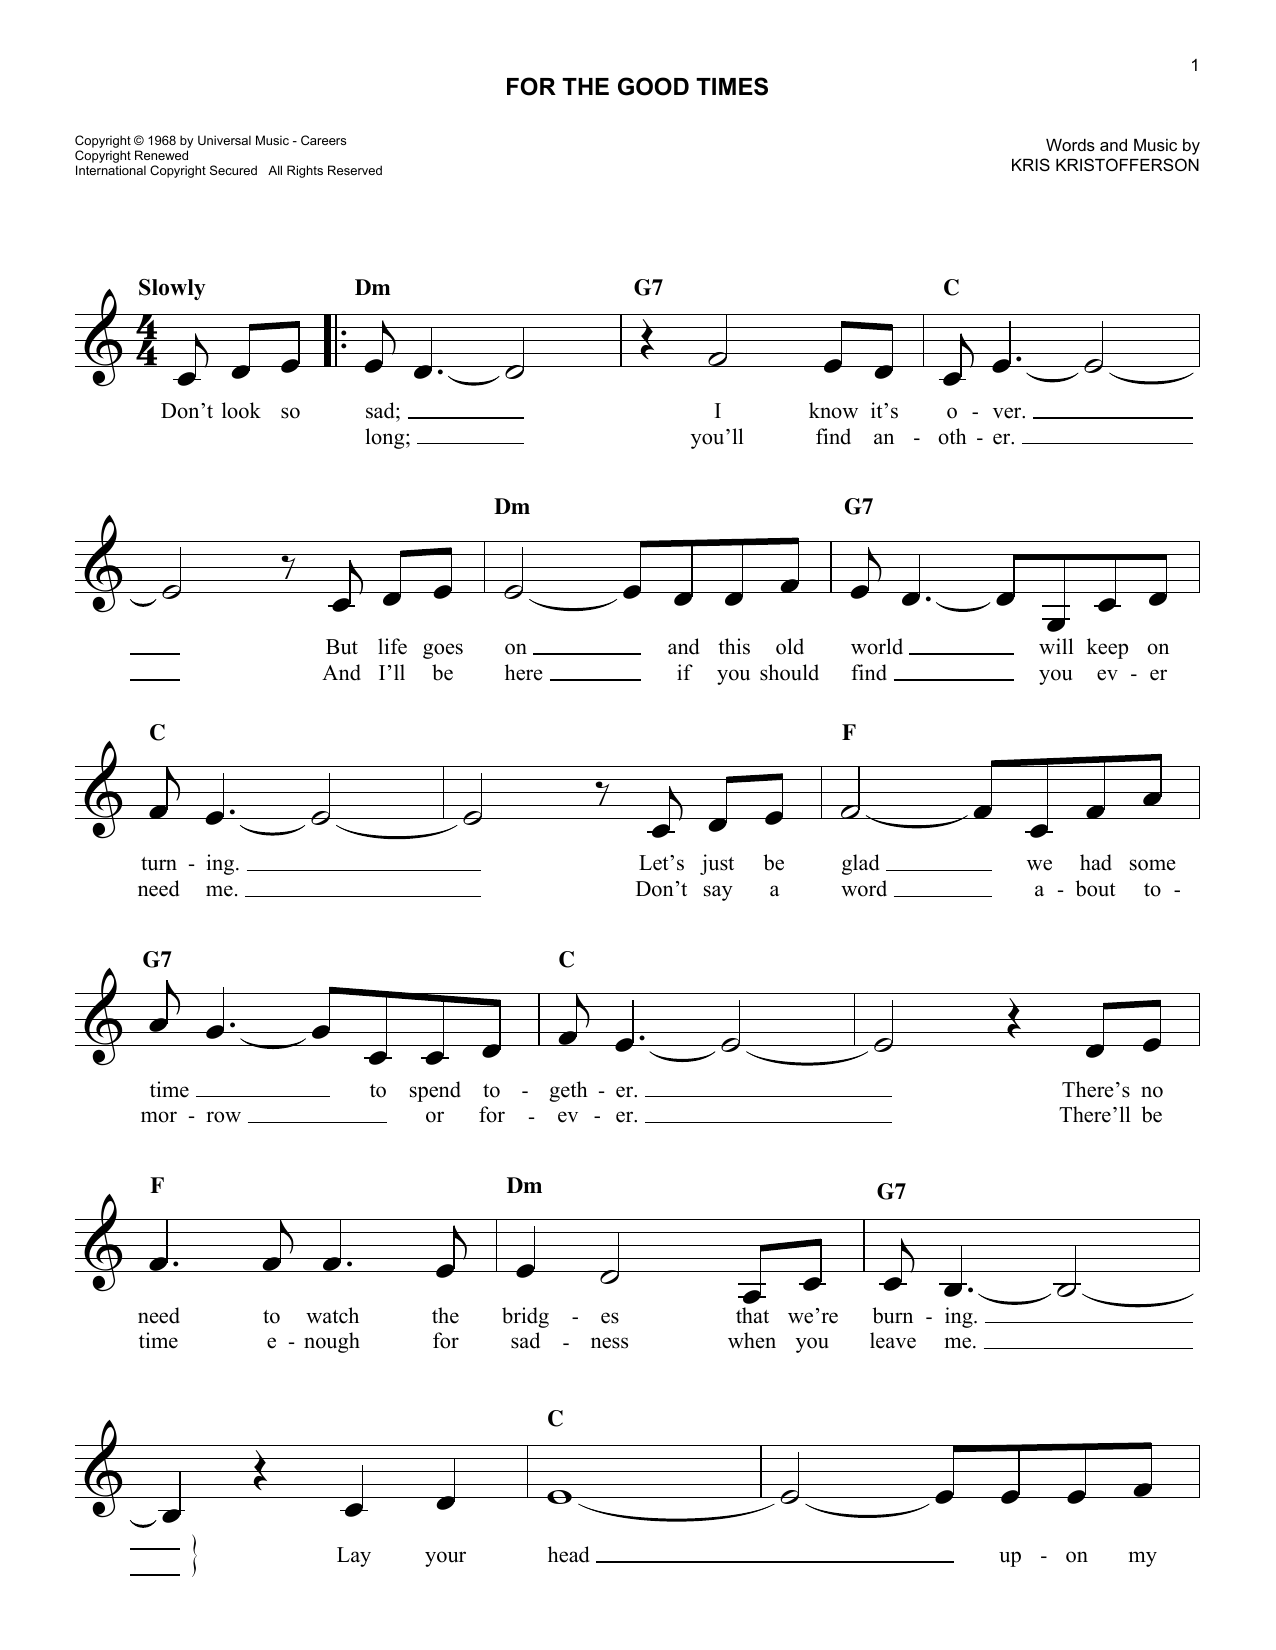 Download Kris Kristofferson For The Good Times Sheet Music